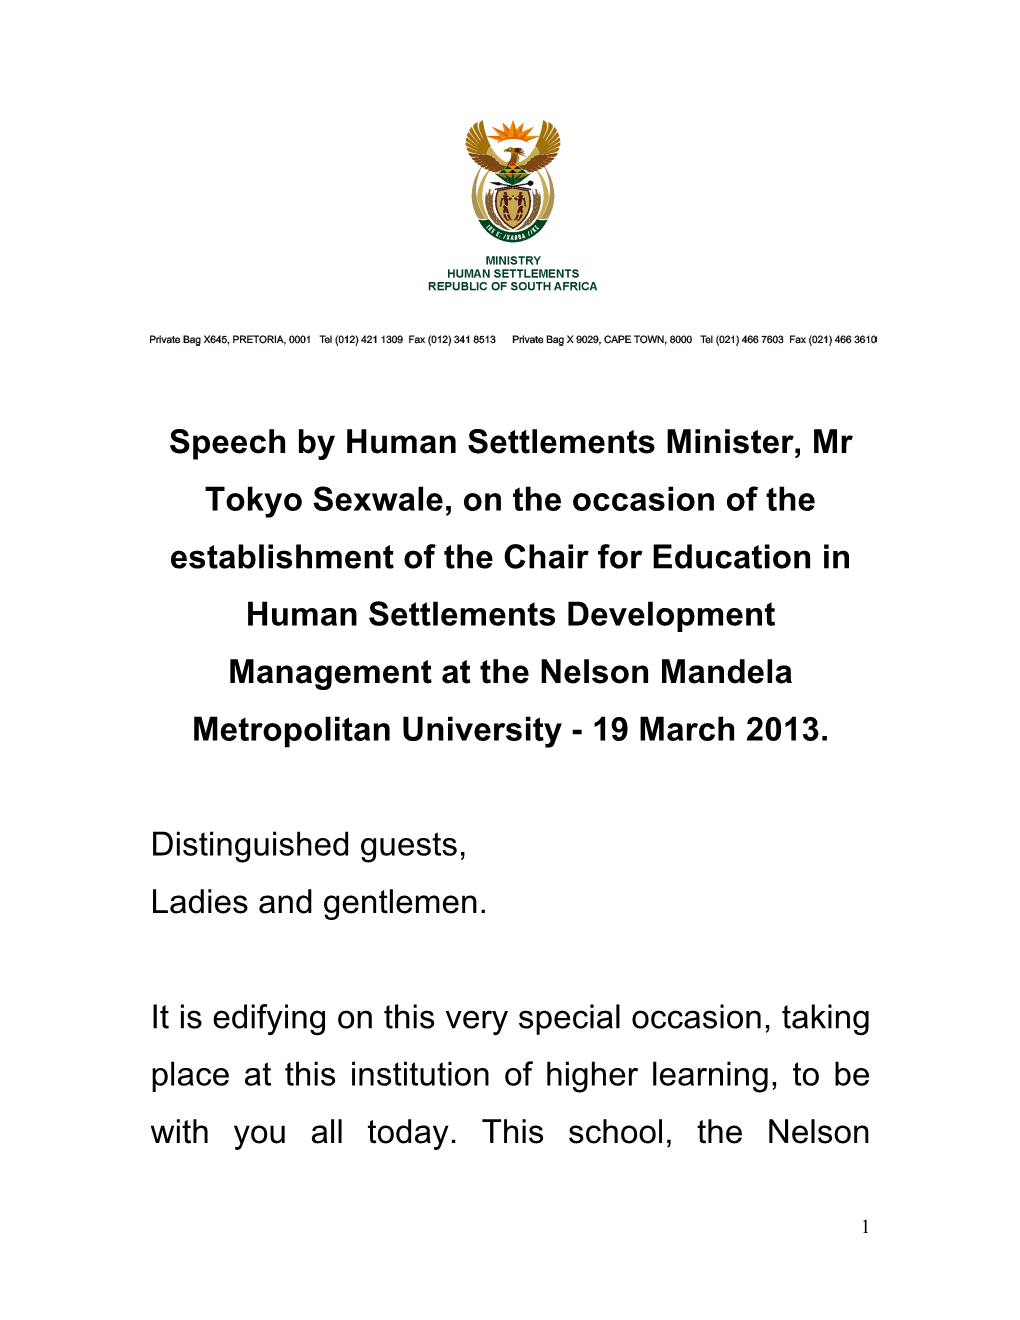 Speech by Human Settlements Minister, Mr Tokyo Sexwale, on The